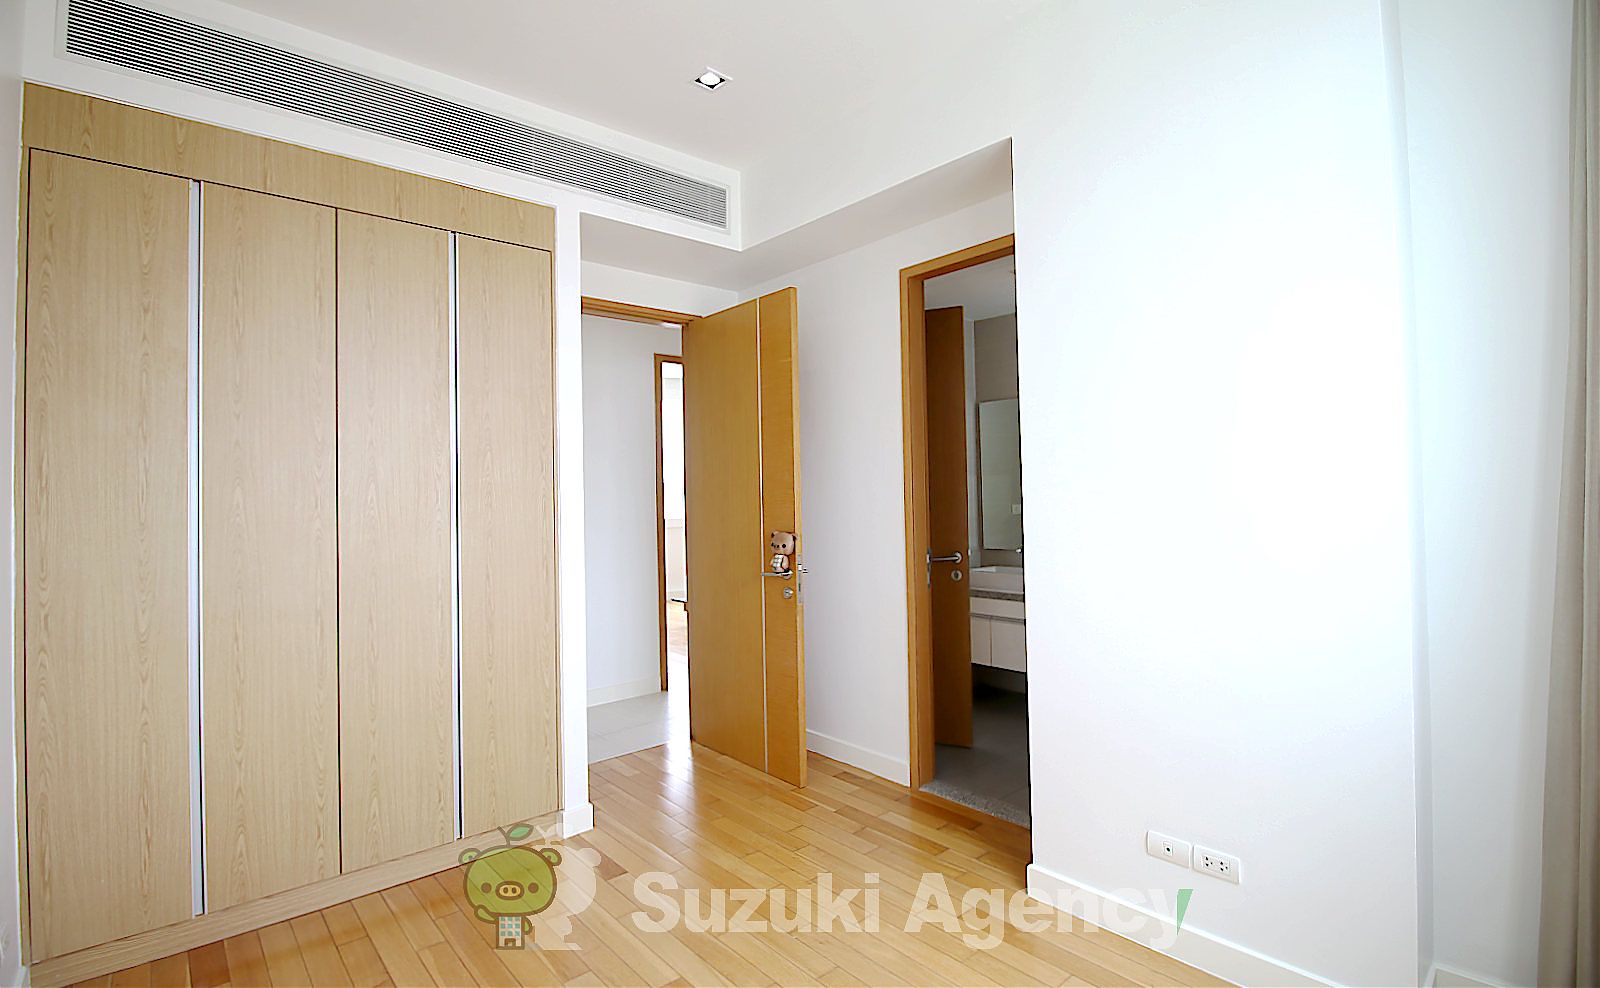 Millennium Residence:3Bed Room Photos No.10